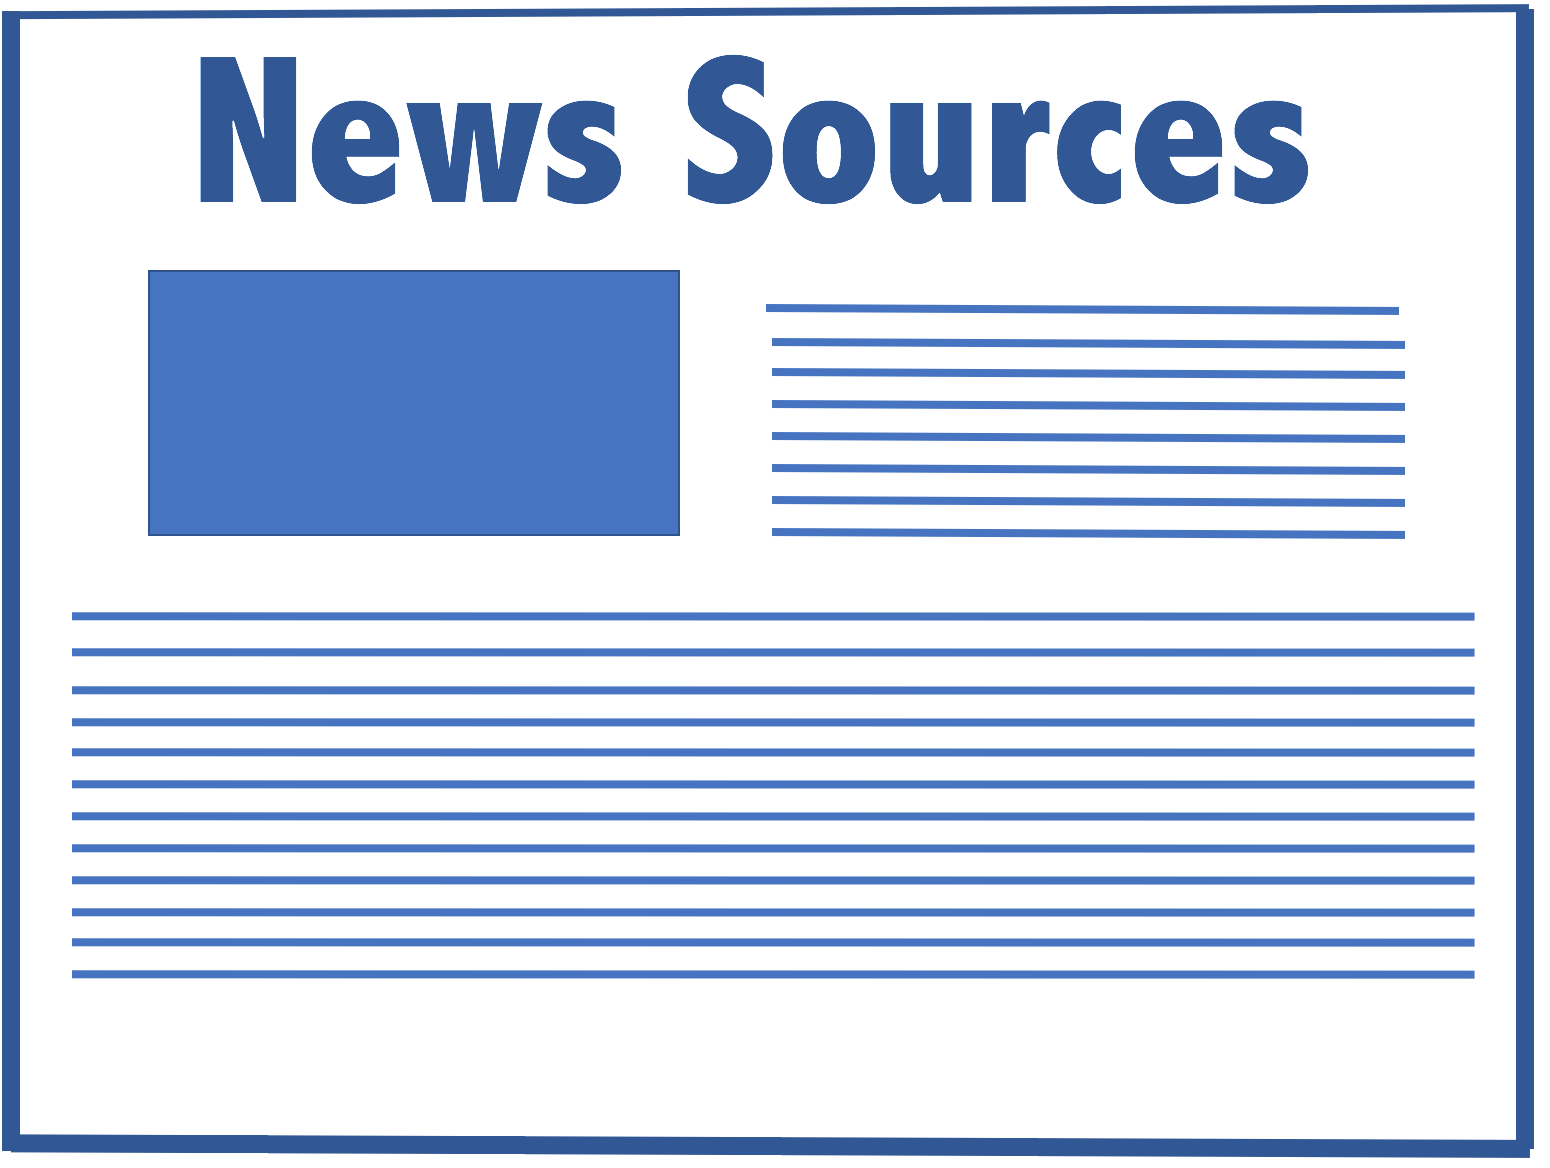 Sources of news